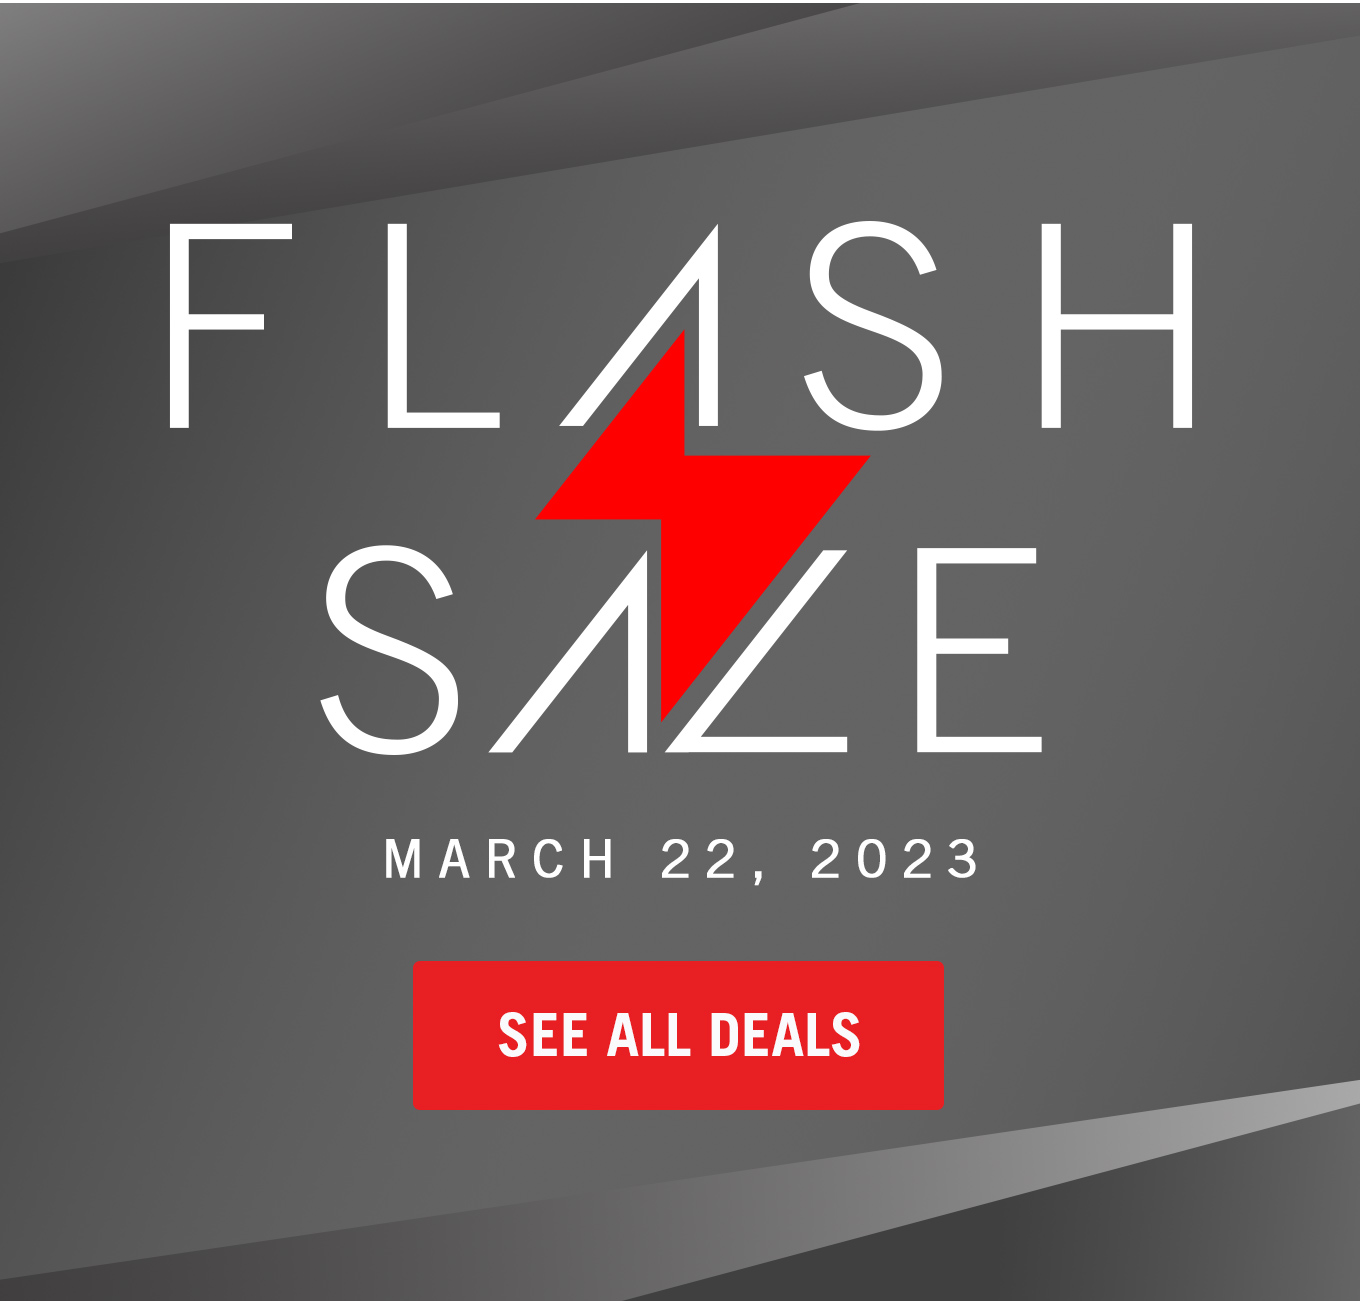 Flash Sale March 15! See all Flash Sale Deals.